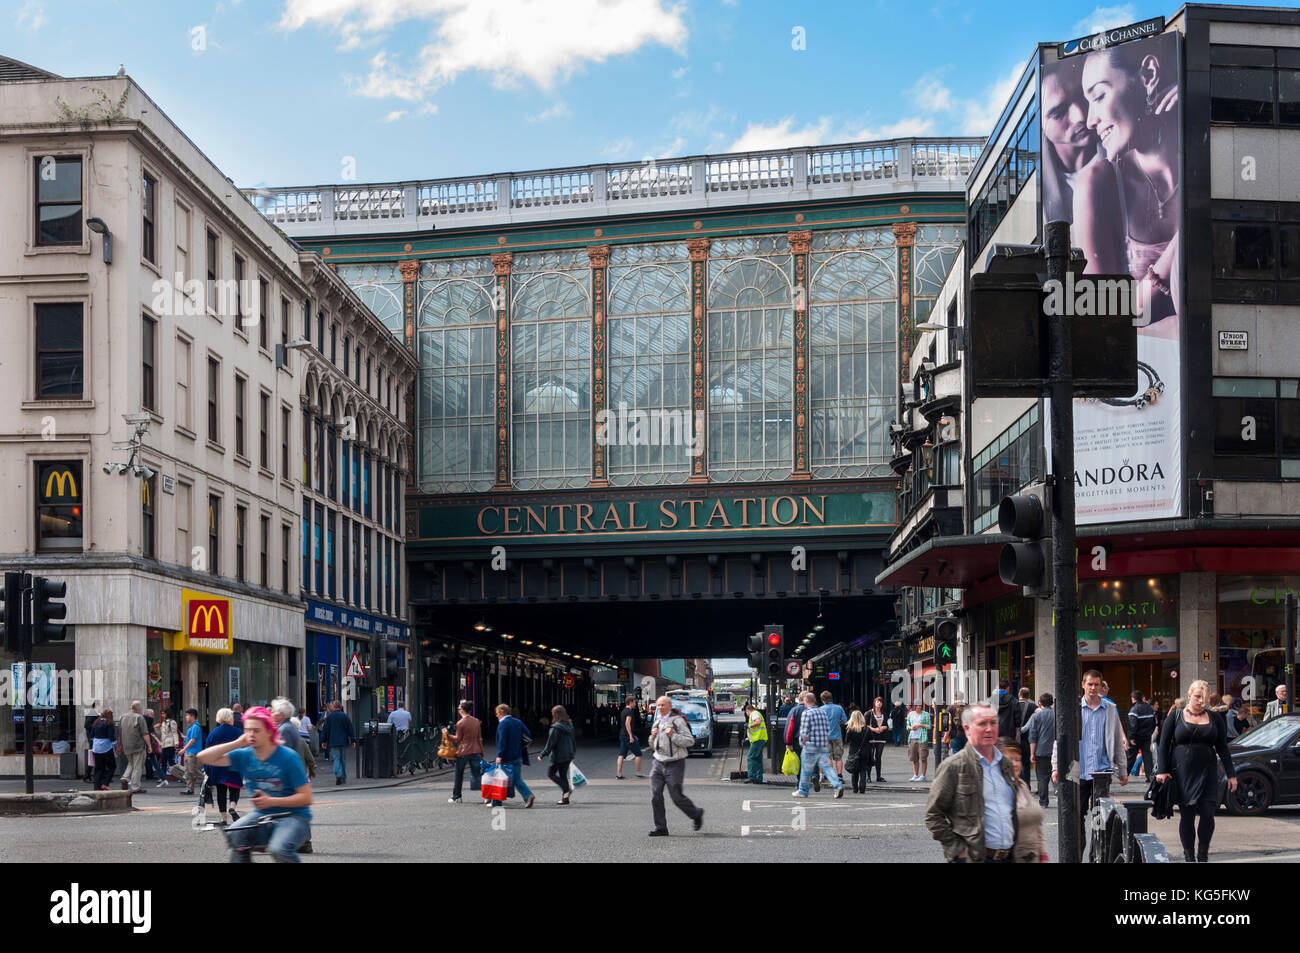 Glasgow, Scotland - August 17, 2010: The exterior of the Glasgow Central Station with people in a busy street in the city of Glasgow, Scotland, United Stock Photo